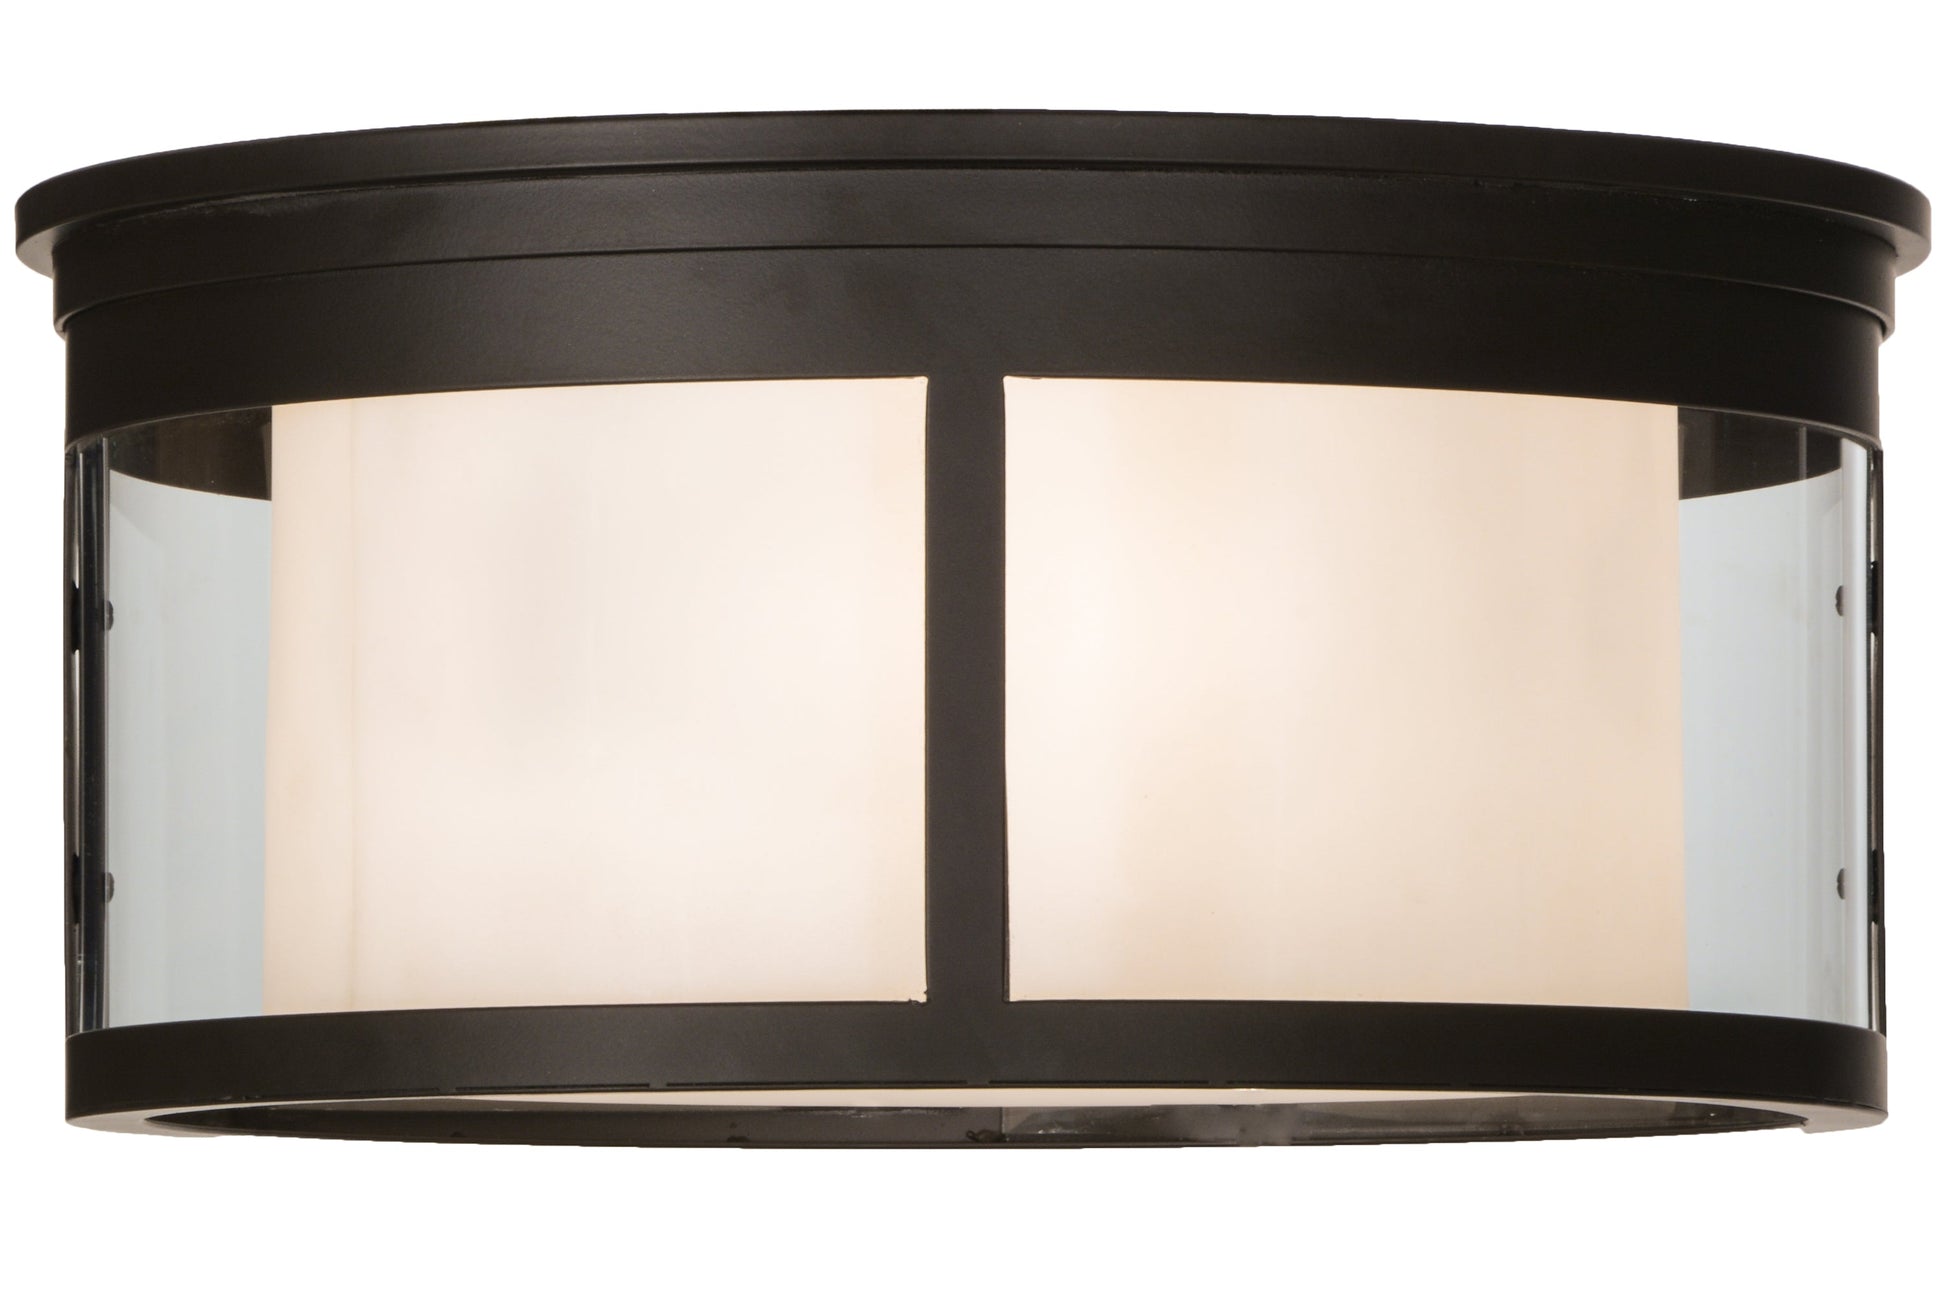 19" Cilindro Campbell Flushmount by 2nd Ave Lighting